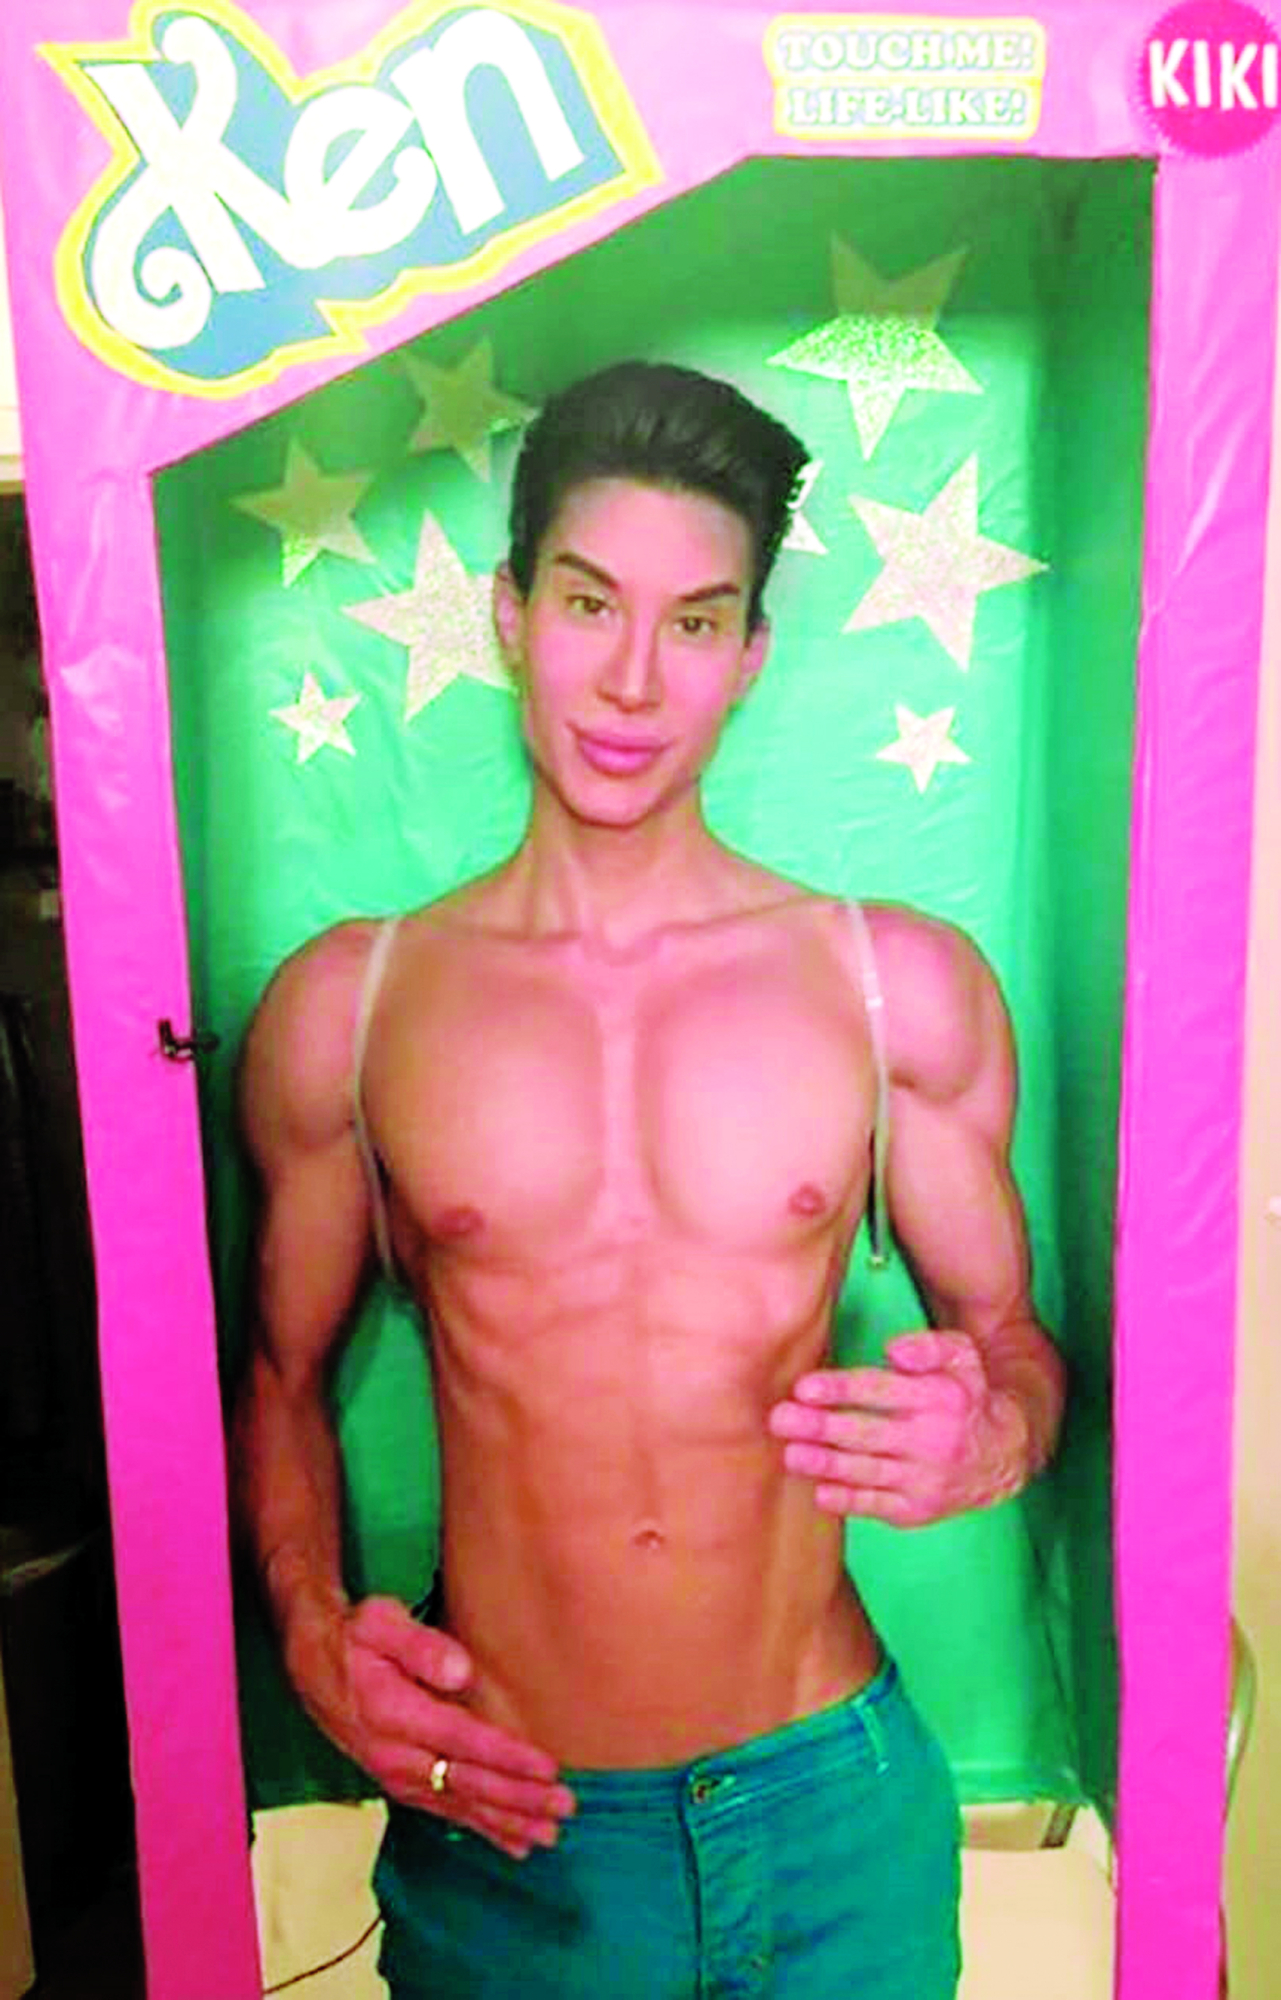 Barbie's human partner exists, as Justin Jedlica, 42, is the flesh and blood Ken.